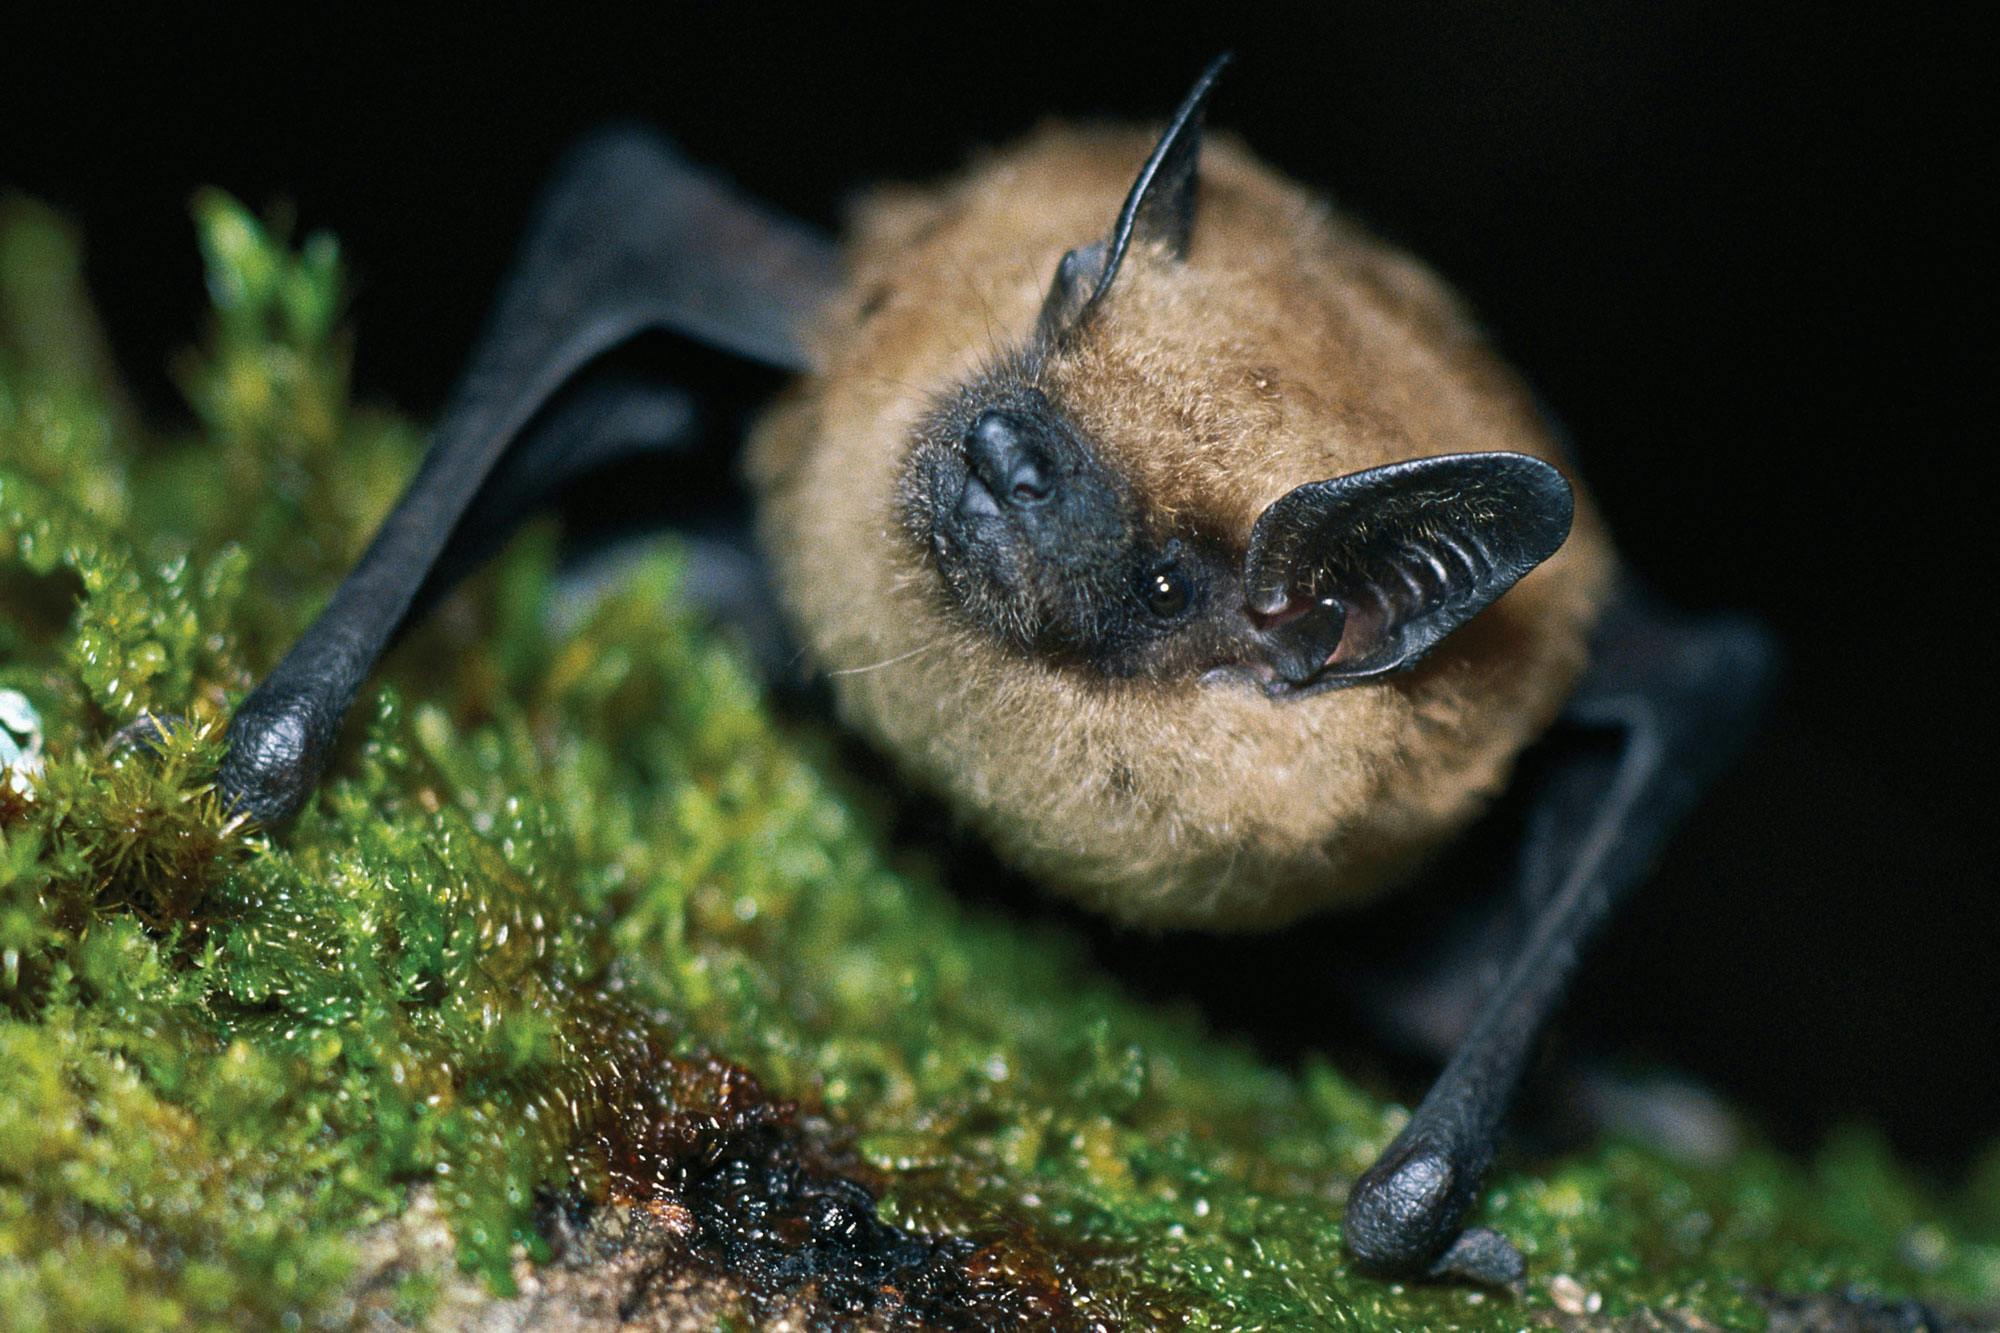 Close-up of a big brown bat perched on a mossy surface. Its fur is light brown and its face, ears, and wings are black.